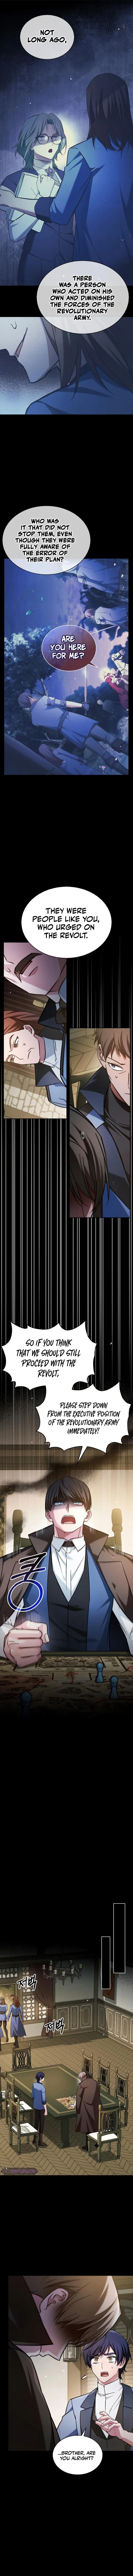 I’m Not That Kind of Talent - Chapter 61 Page 5